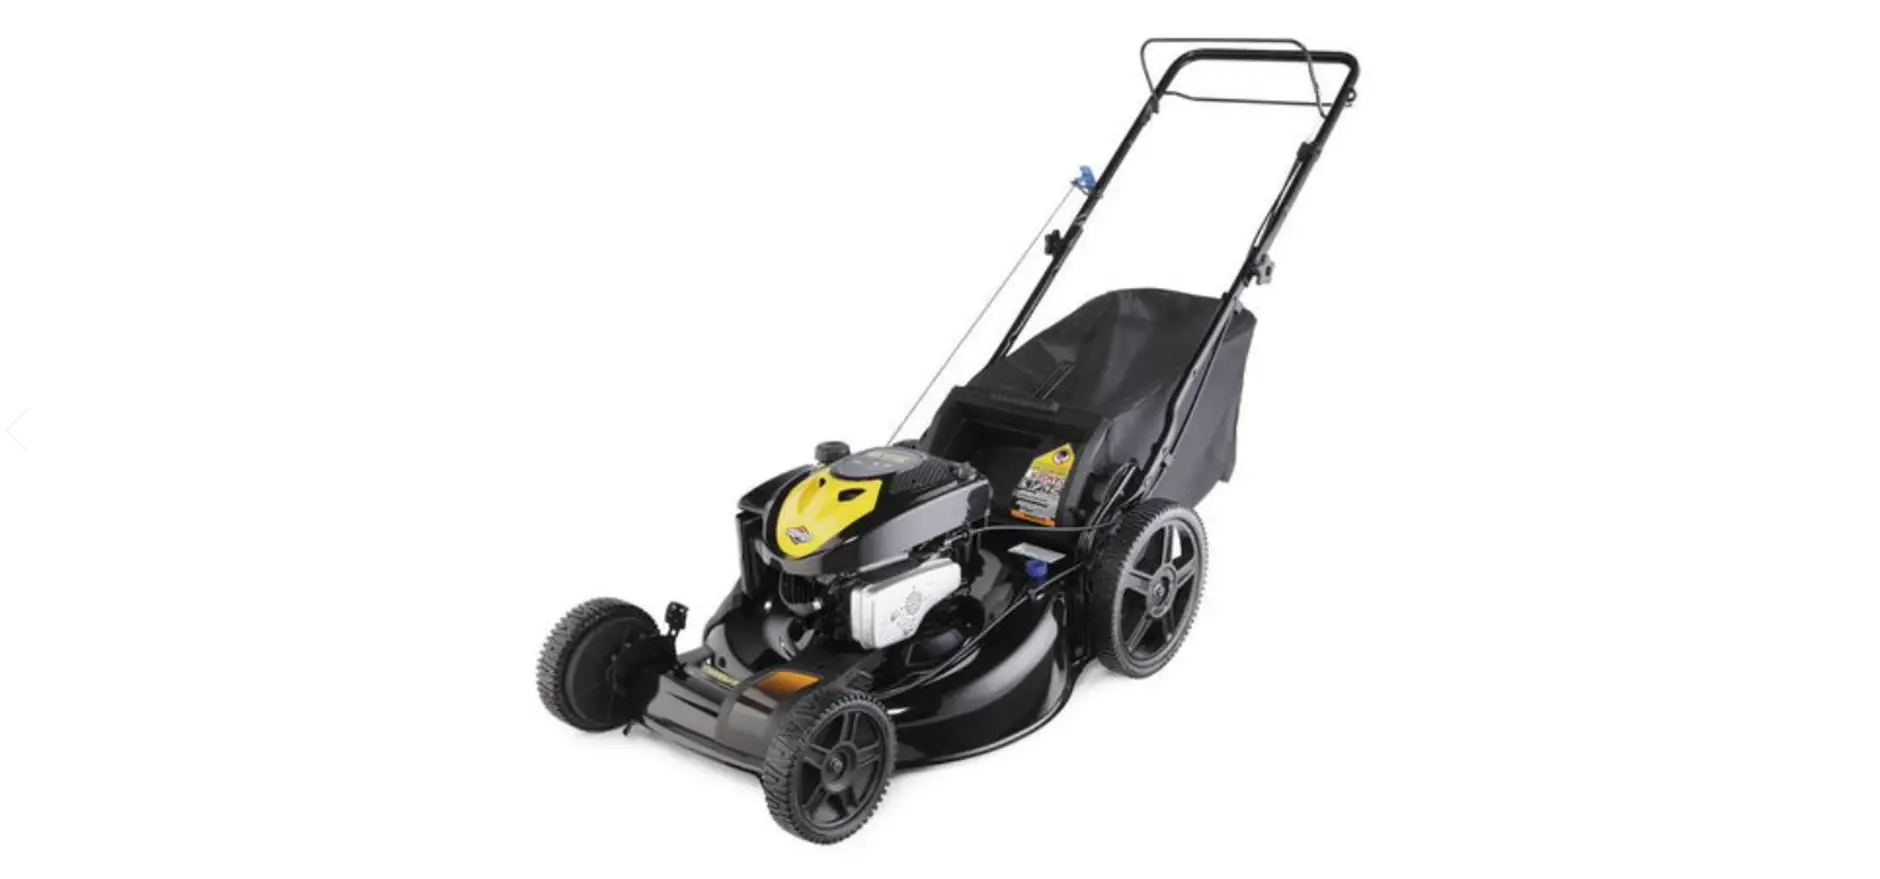 chainsaw Recalls Lawn Mowers Due to Laceration